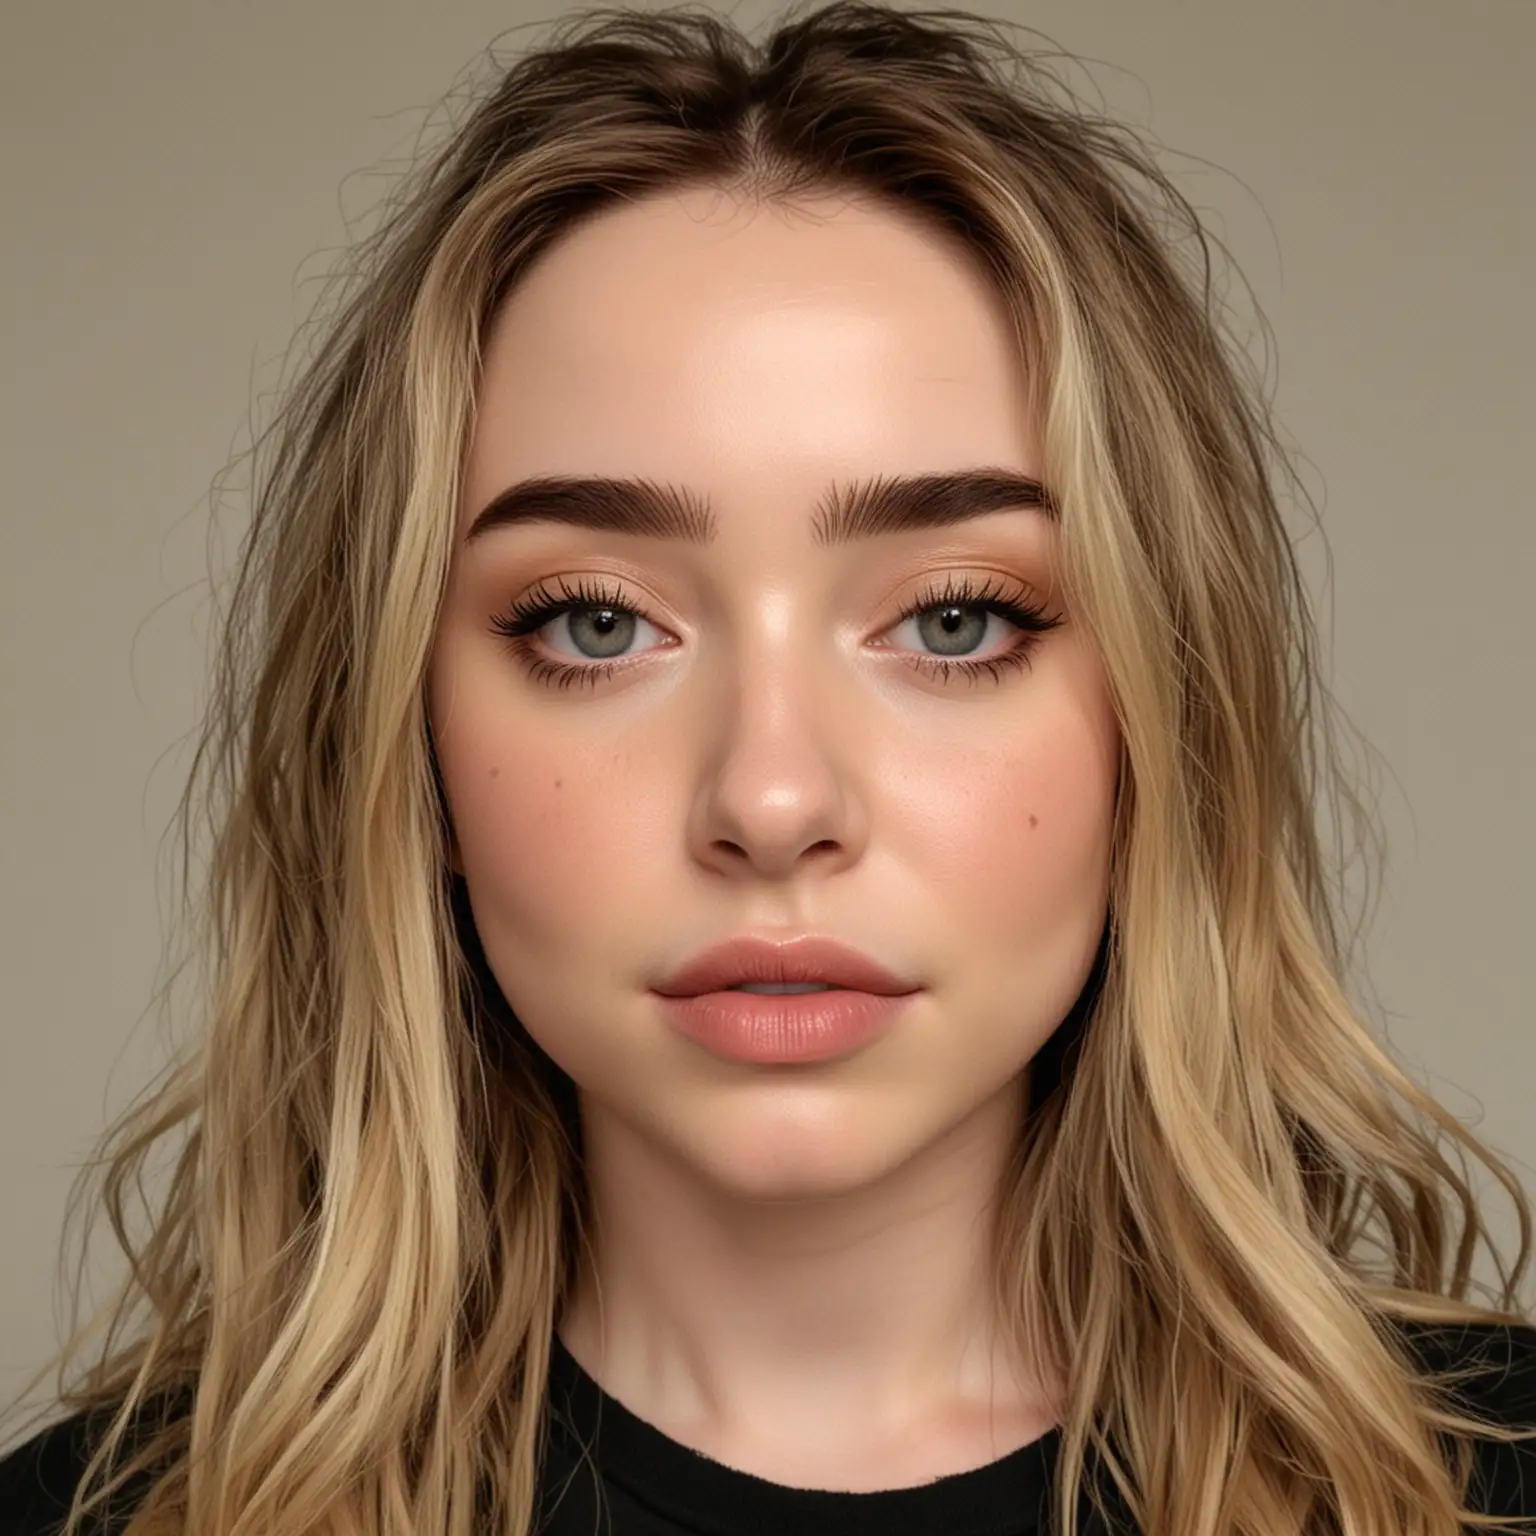 Sabrina Carpenter Portrait Without Makeup and Neutral Expression